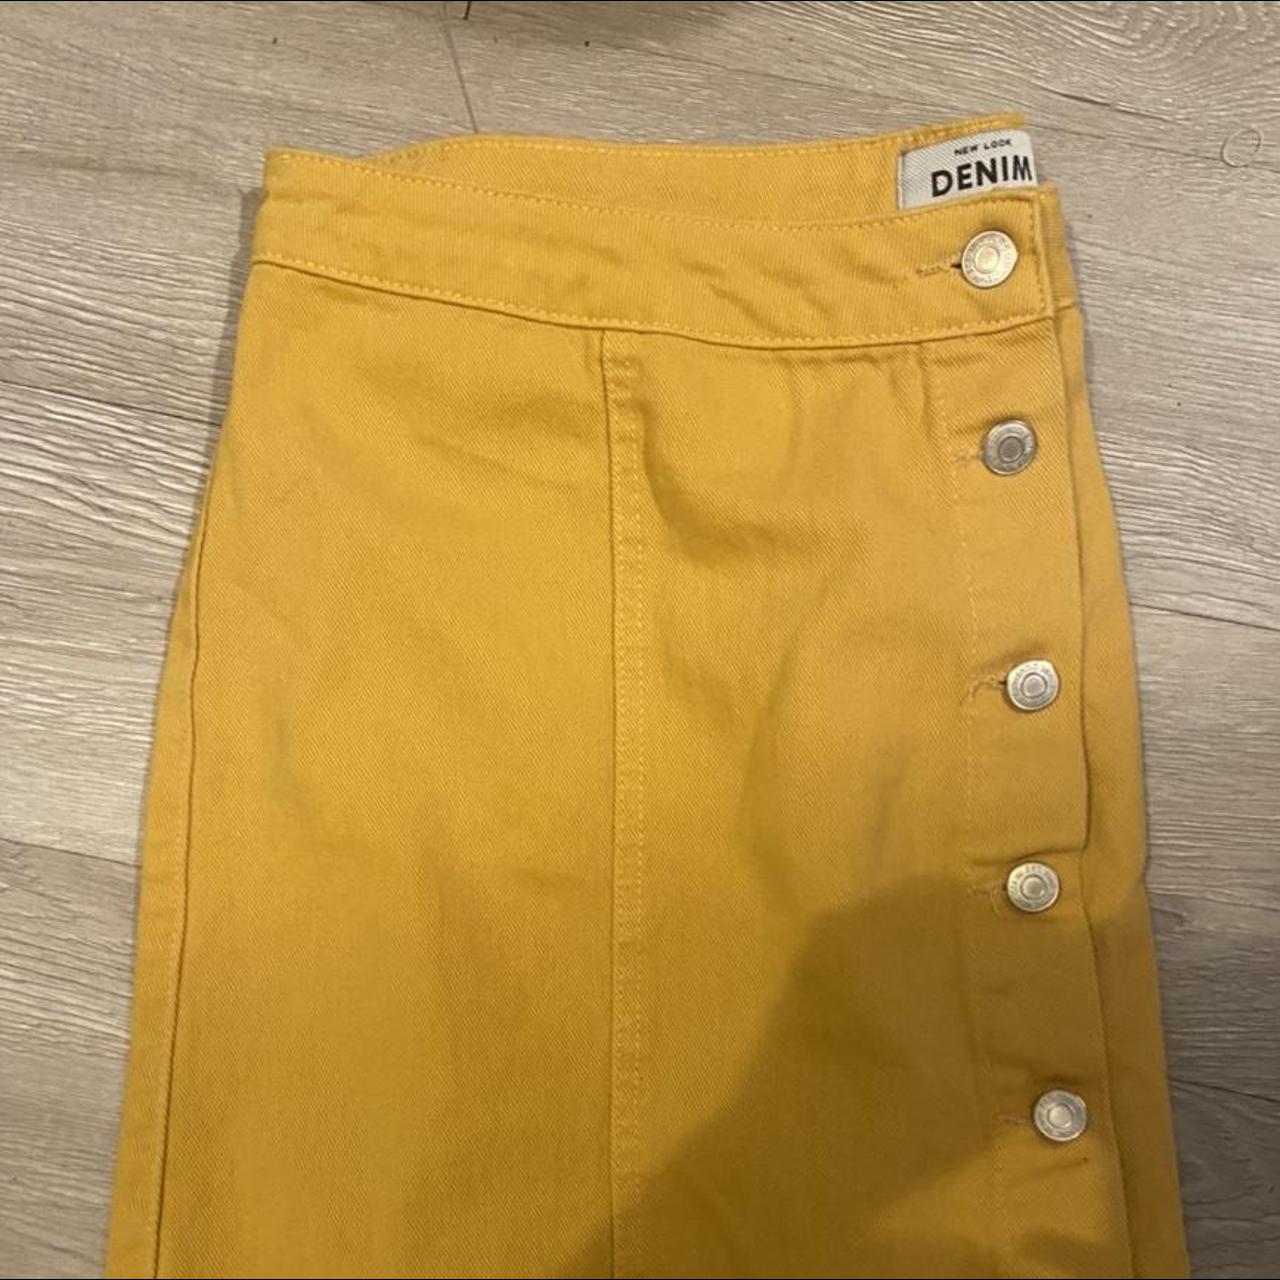 New Look Women's Yellow and Silver Skirt | Depop